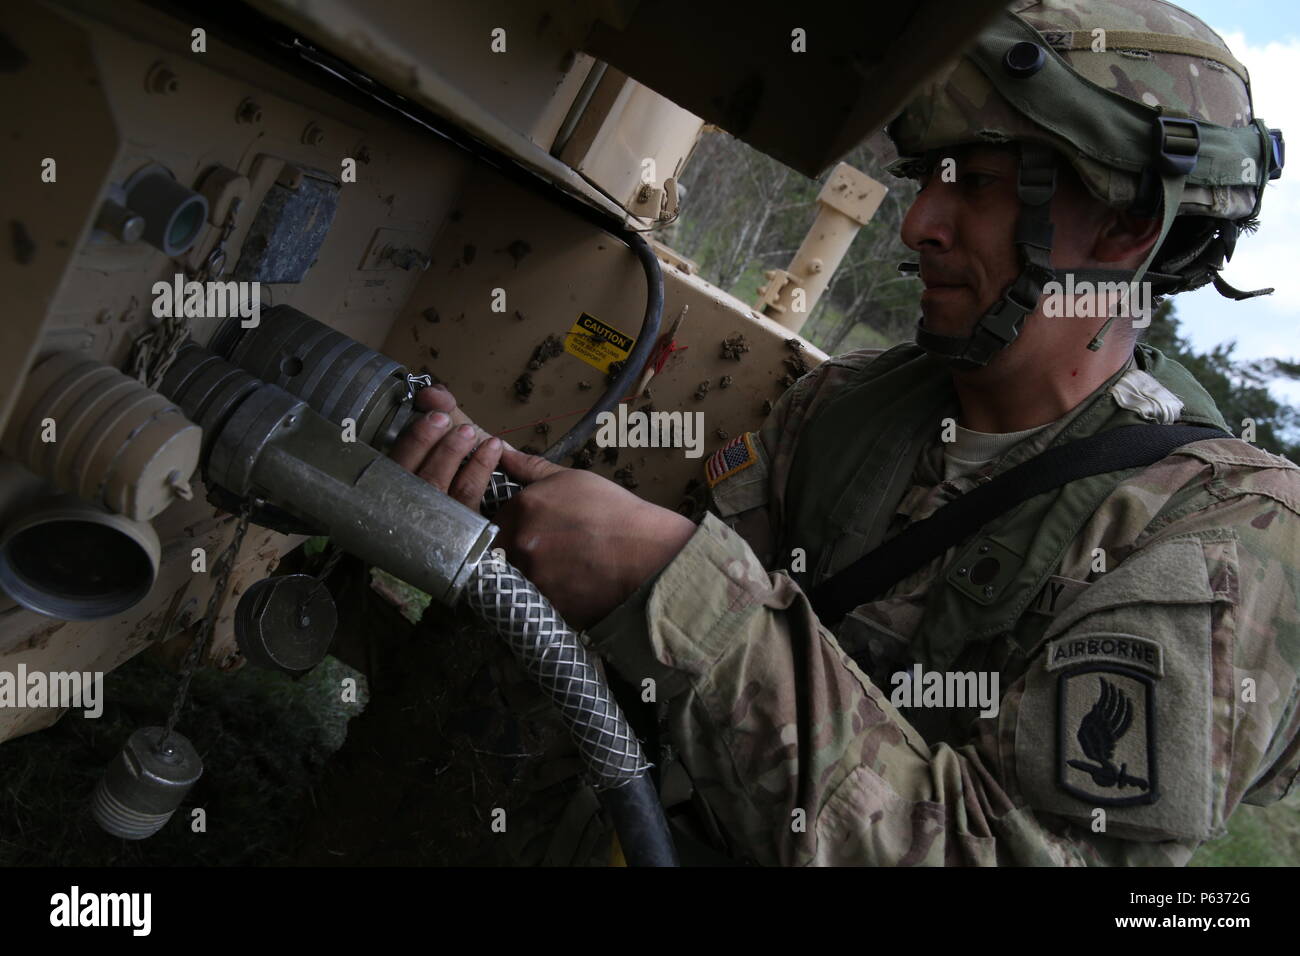 U.S. Army Sgt. David Gonzalez of 4th Battalion, 319th Airborne Field Artillery Regiment, 173rd Airborne Brigade connects power lines to a generator while conducting a site survey during exercise Saber Junction 16 at the U.S. Army’s Joint Multinational Readiness Center (JMRC) in Hohenfels, Germany, April 14, 2016. Saber Junction 16 is the U.S. Army Europe’s 173rd Airborne Brigade’s combat training center certification exercise, taking place at the JMRC in Hohenfels, Germany, Mar. 31-Apr. 24, 2016.  The exercise is designed to evaluate the readiness of the Army’s Europe-based combat brigades to  Stock Photo